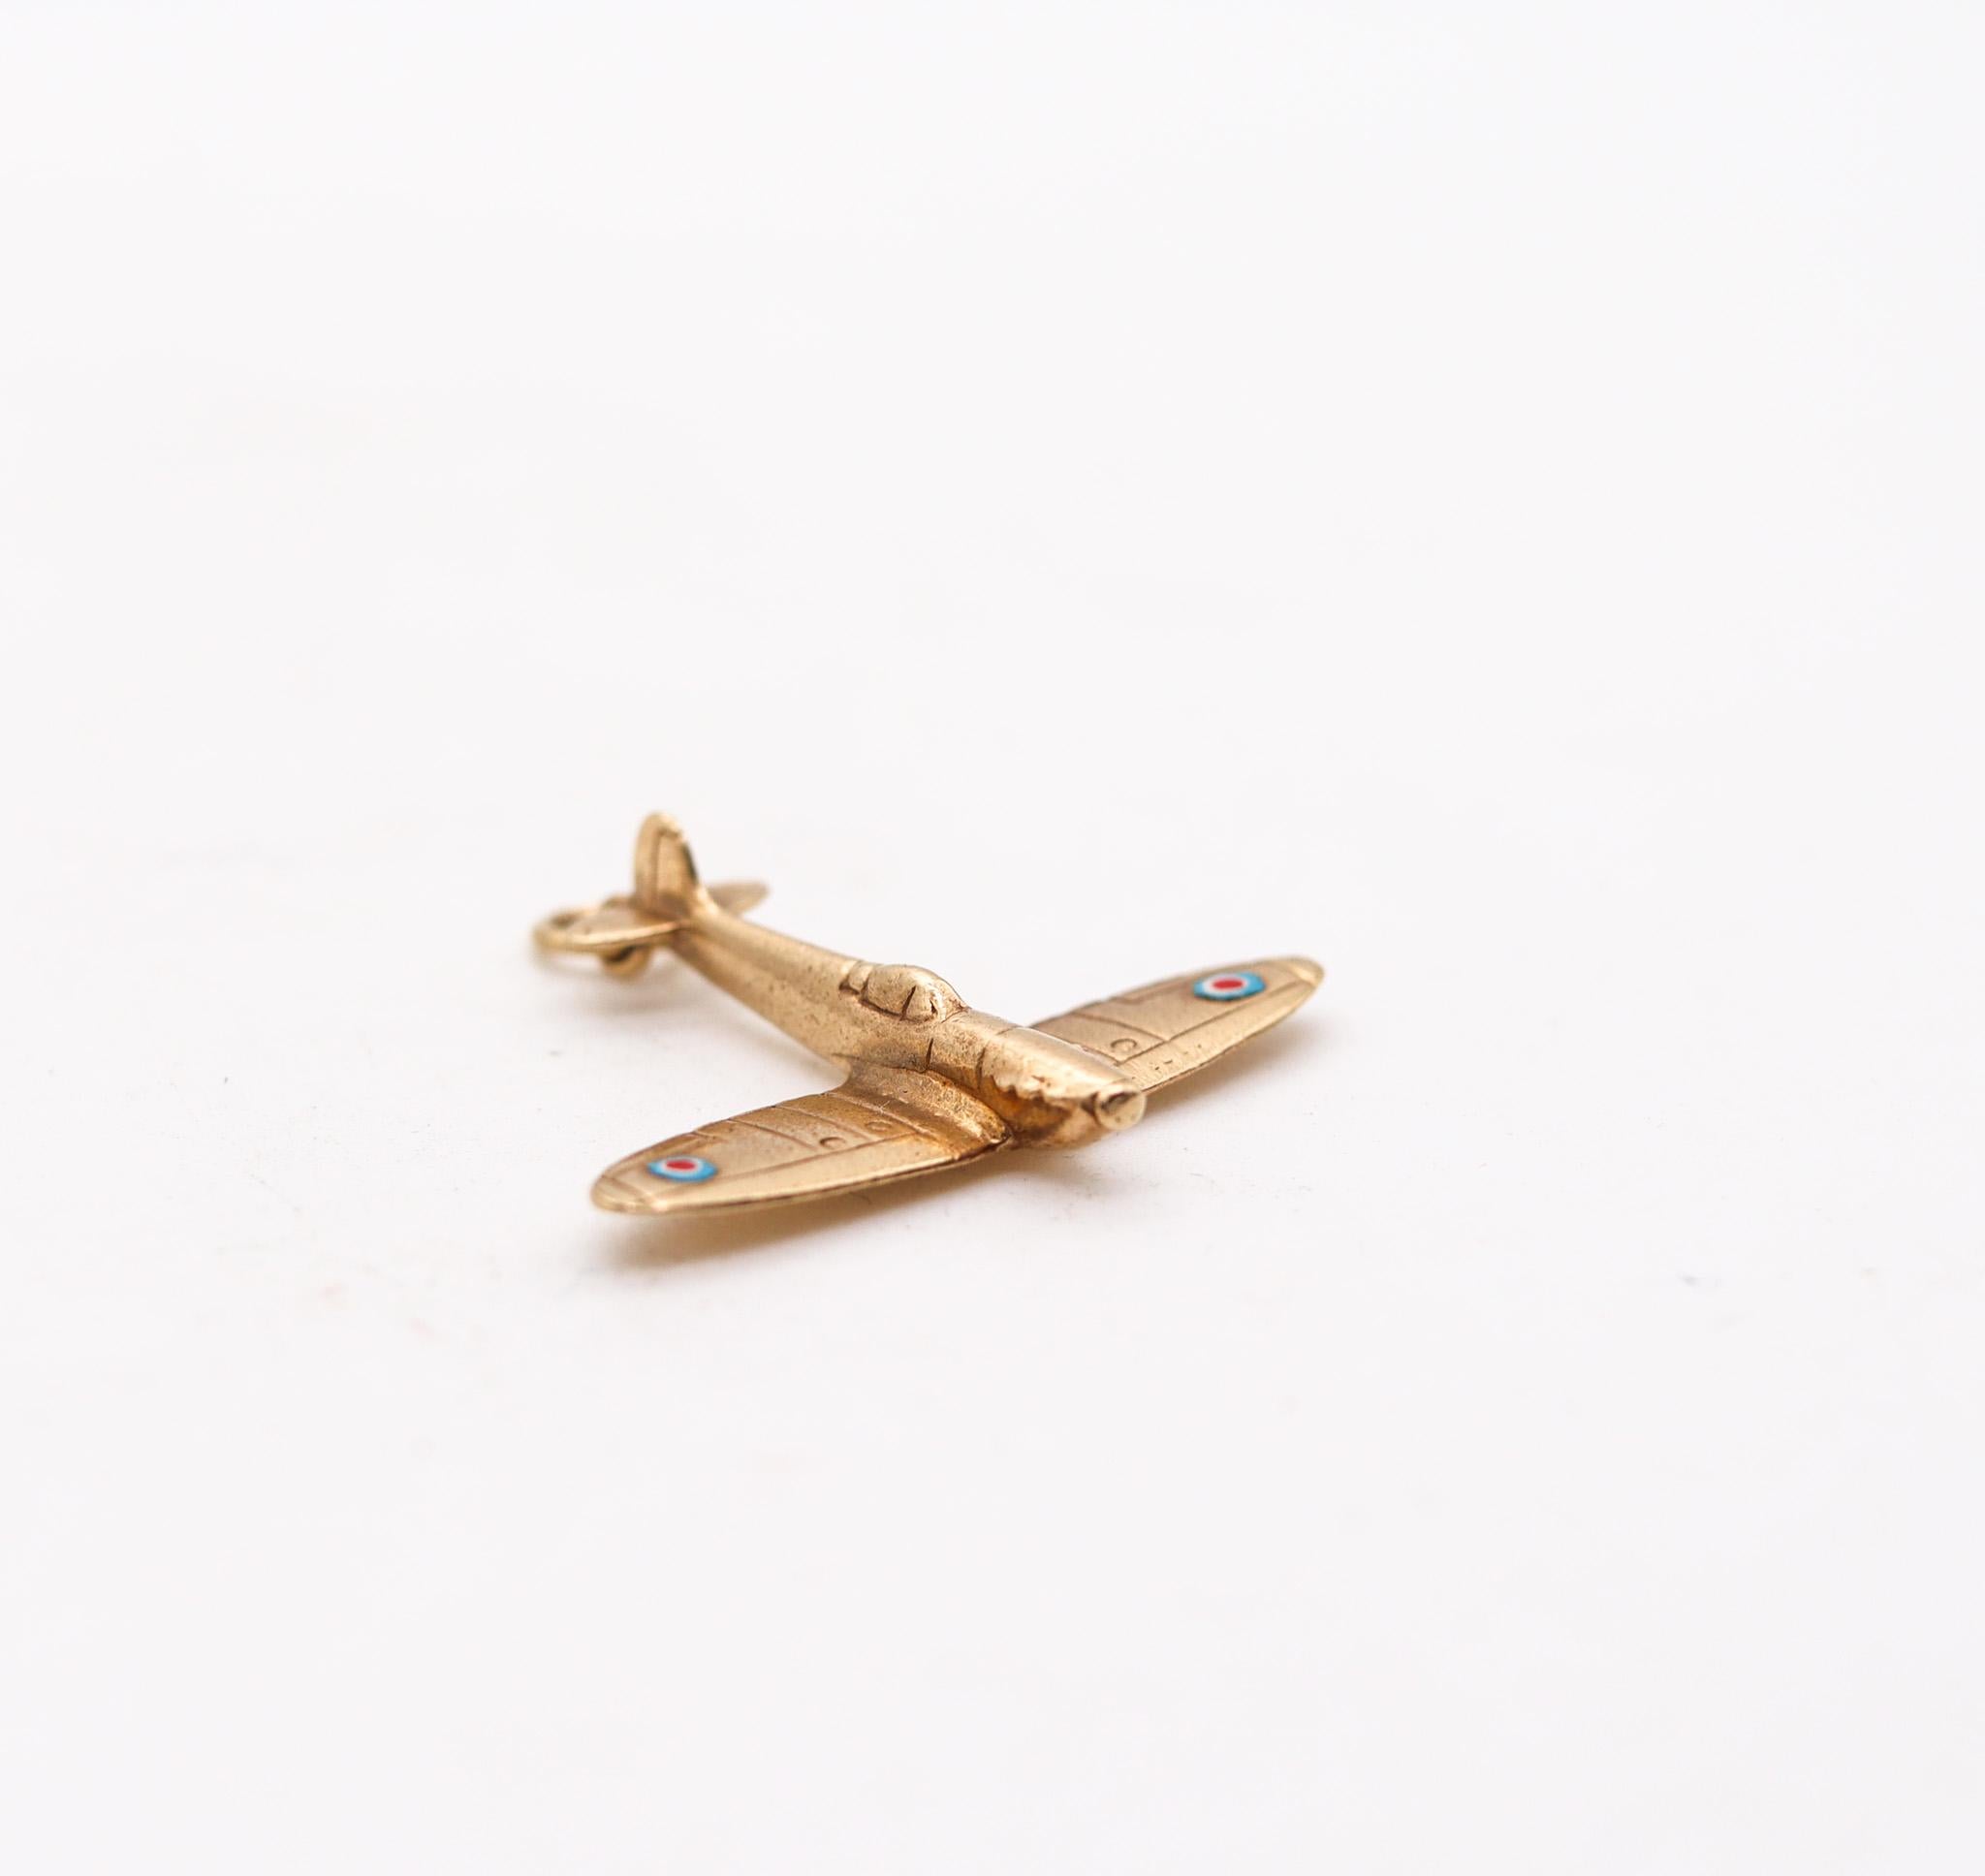 Post war enameled airplane pendant charm.

Stunning well detailed pendant charm, created in London England during the post war period, in the 1950. The charm has been made with very nice details in the shape of a British war plane from the RAF.